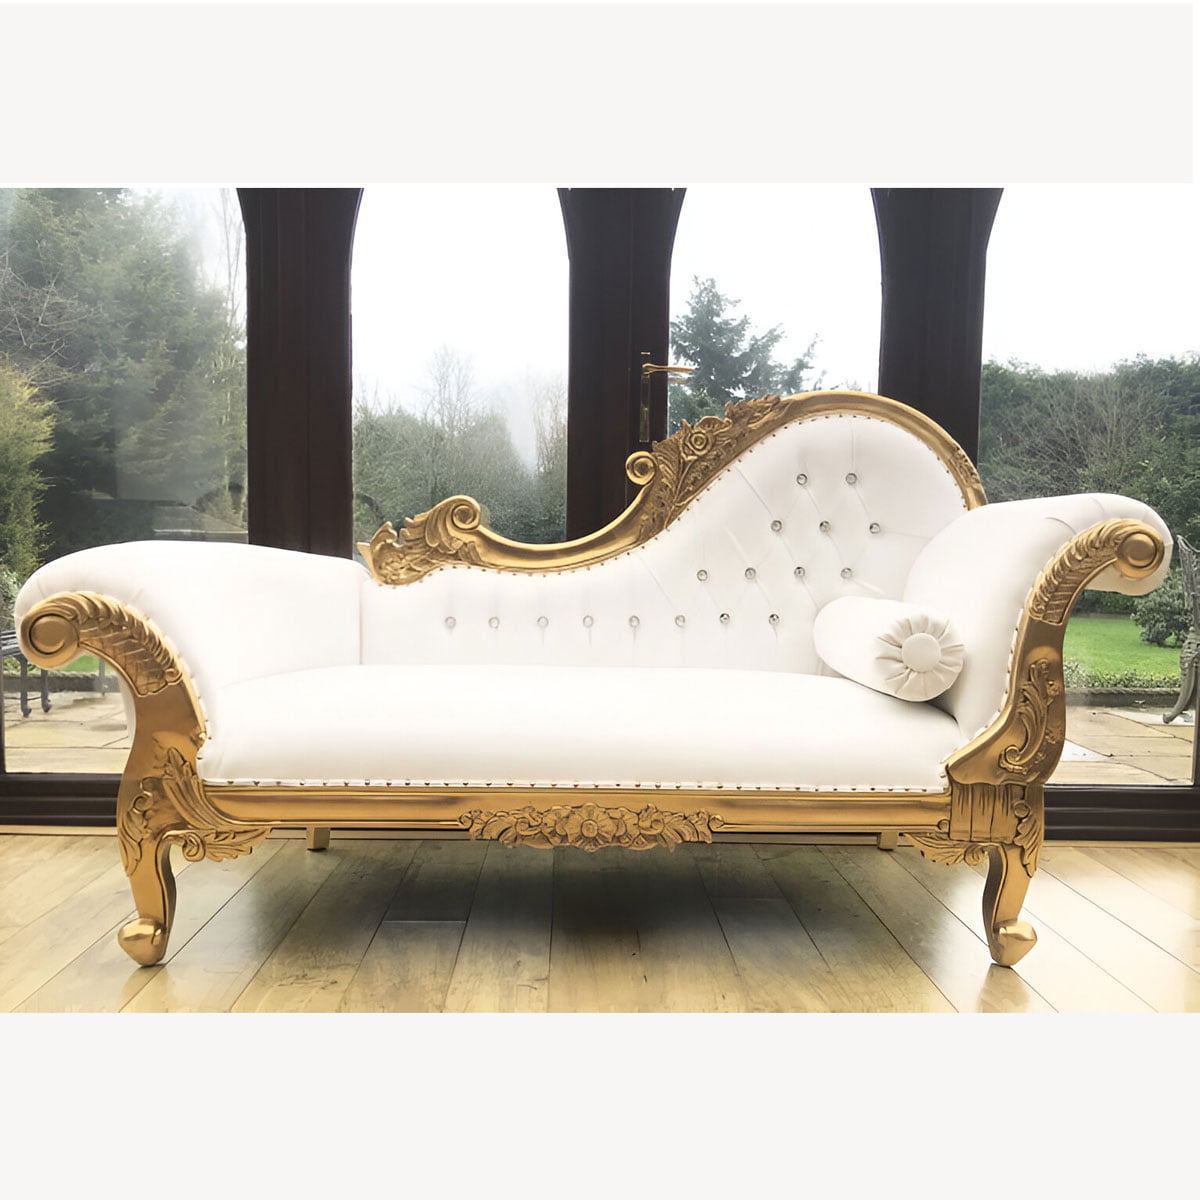 Beautiful Chaise Gold Leaf Frame With Bright White Faux Leather Medium Size With Crystal Buttons 1 - Hampshire Barn Interiors - Home - Hampshire Barn Interiors News